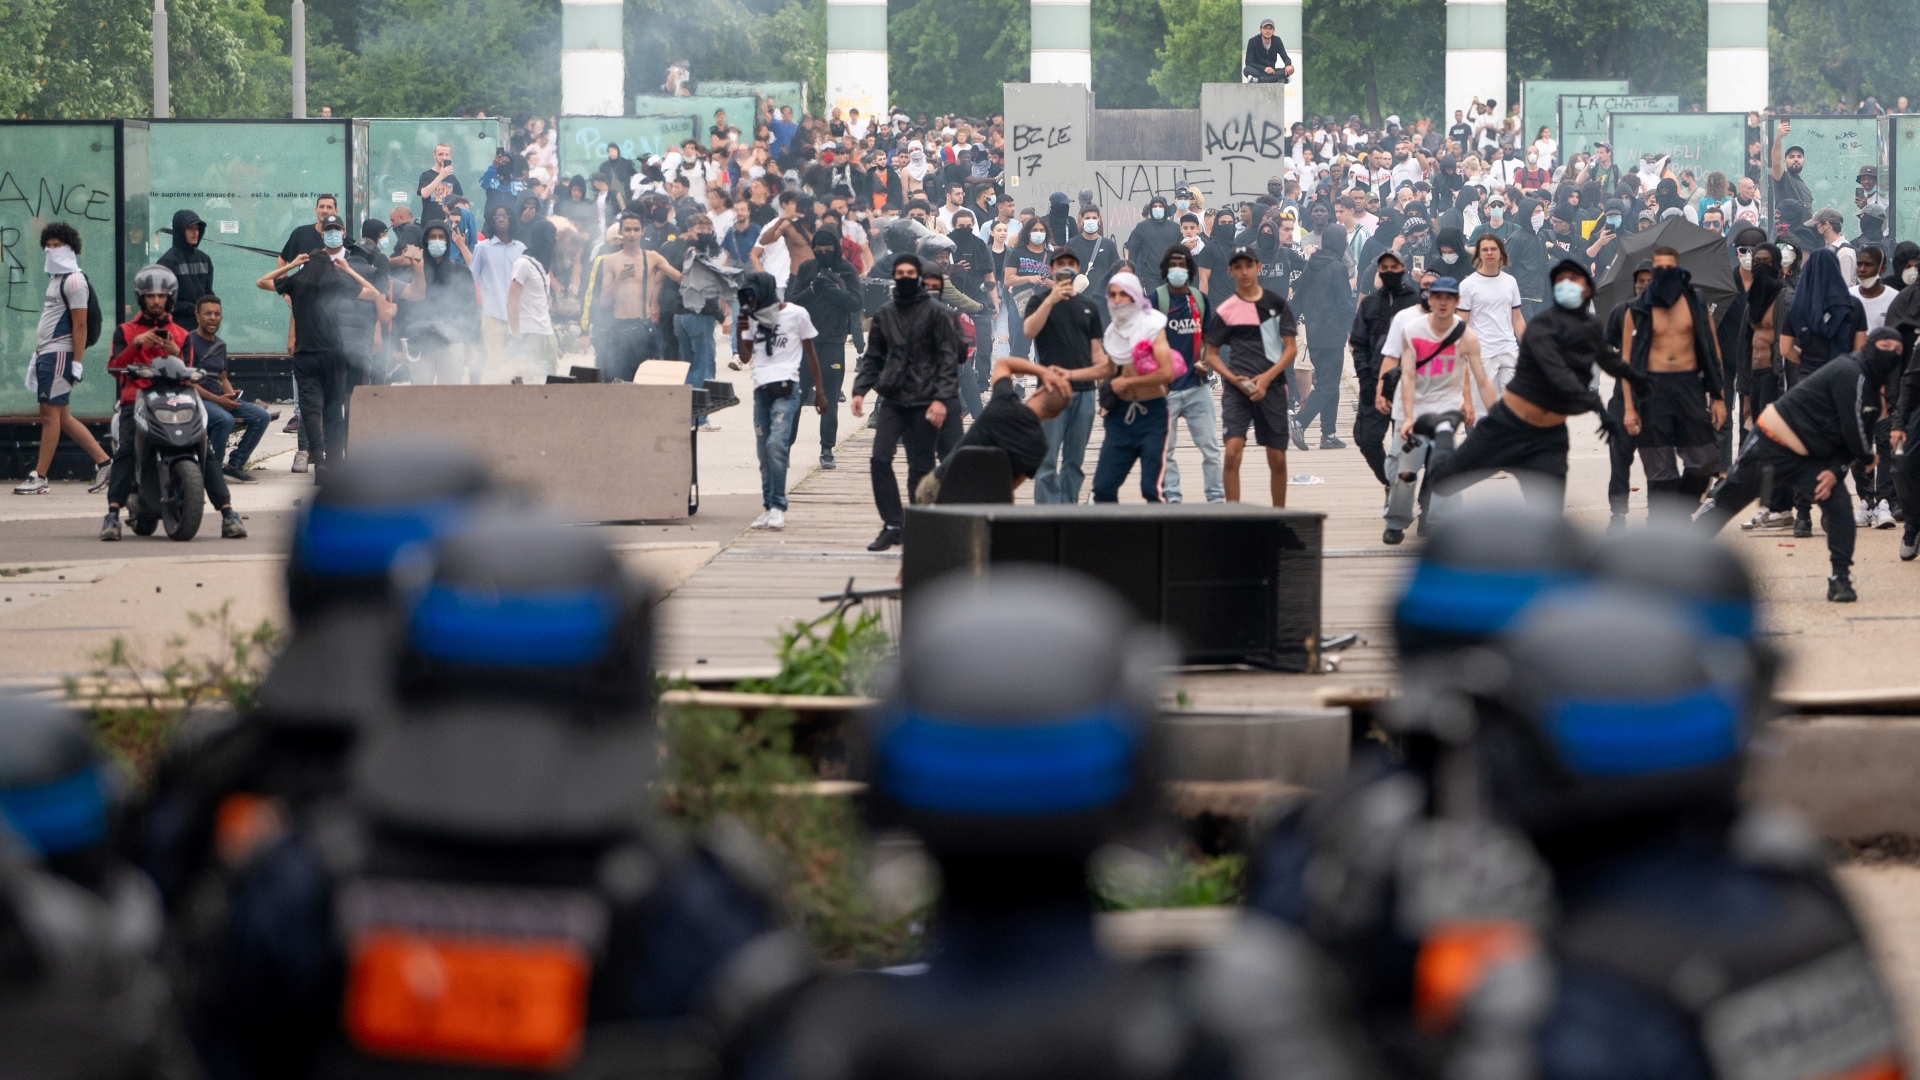 Demonstrators clash with police after a march protesting the shooting of Nahel, 17, by a police officer in the Nanterre suburb of Paris, France, on Thursday, June 29, 2023.